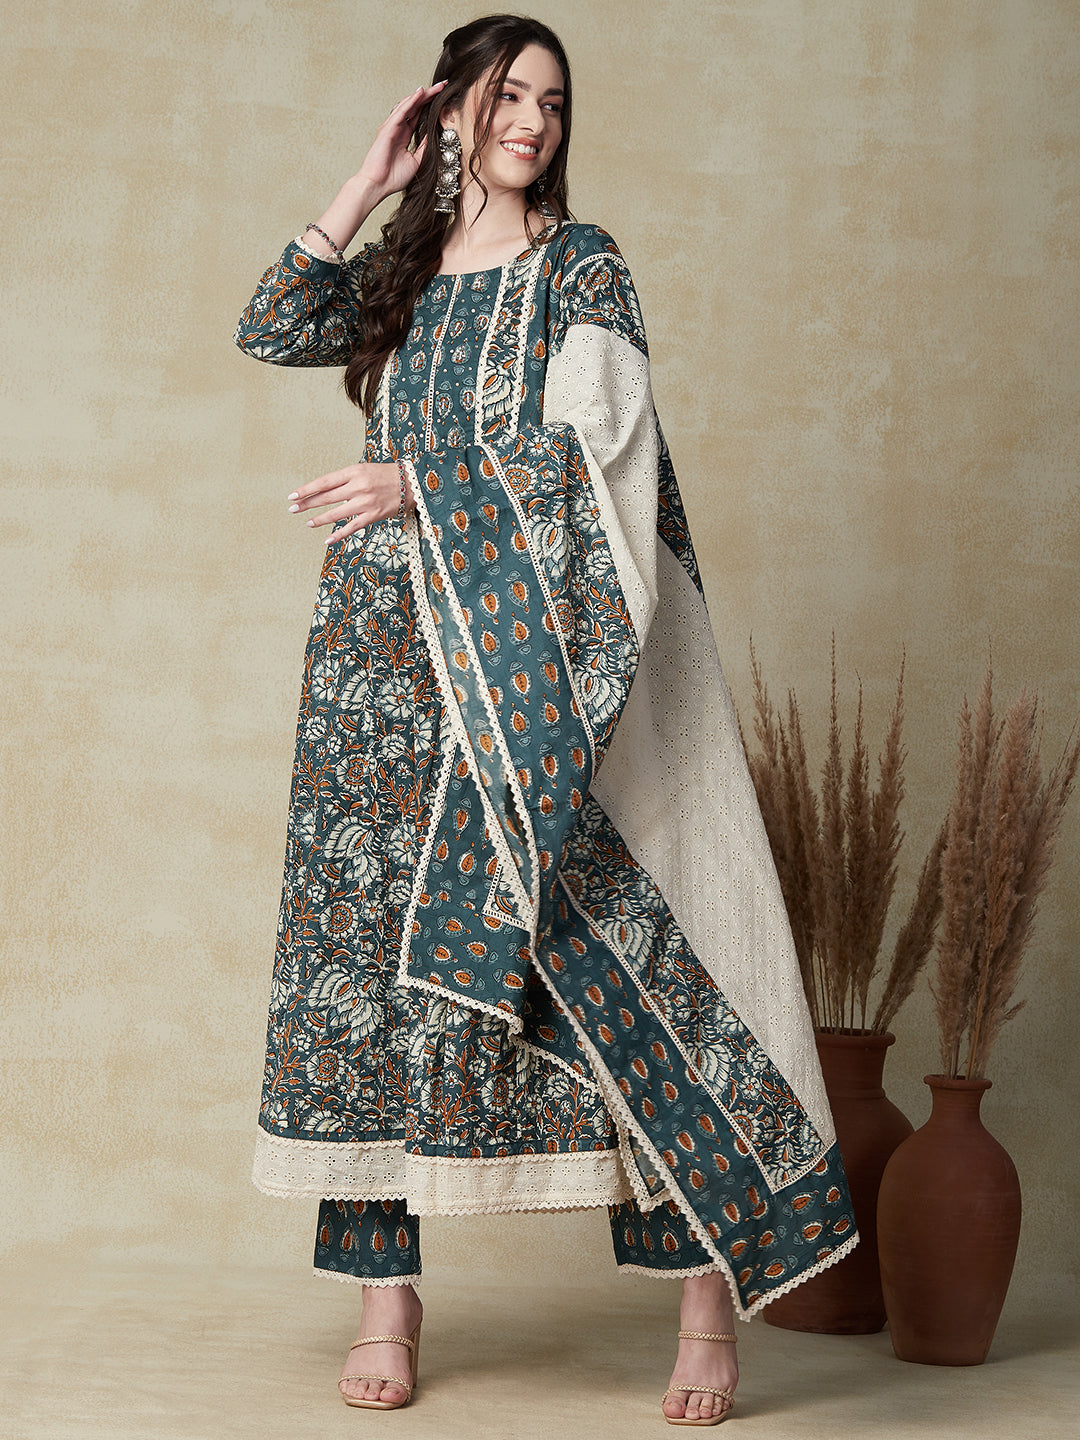 Floral Printed Sequins Embroidered Anarkali Kurta with Pants & Schiffili Dupatta - Green